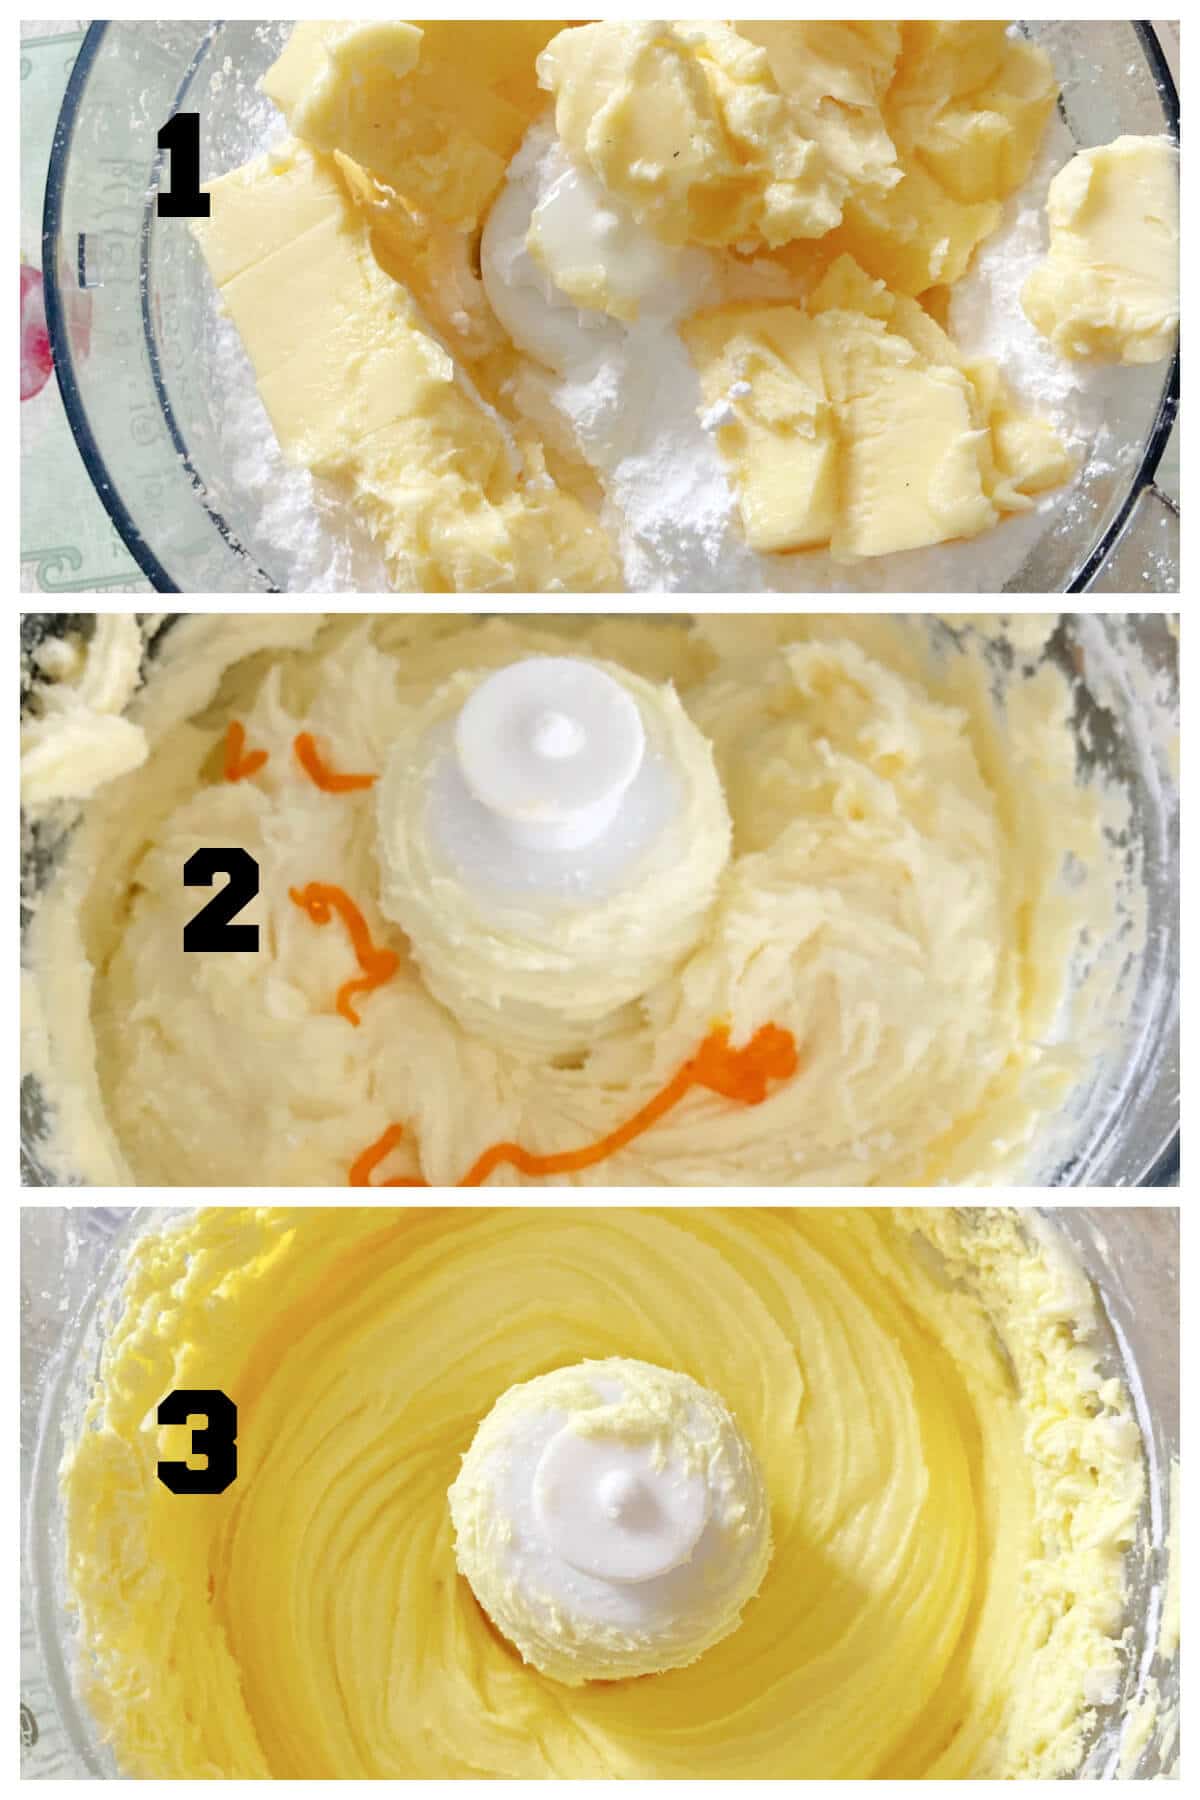 Collage of 3 photos to show how to make lemon buttercream.